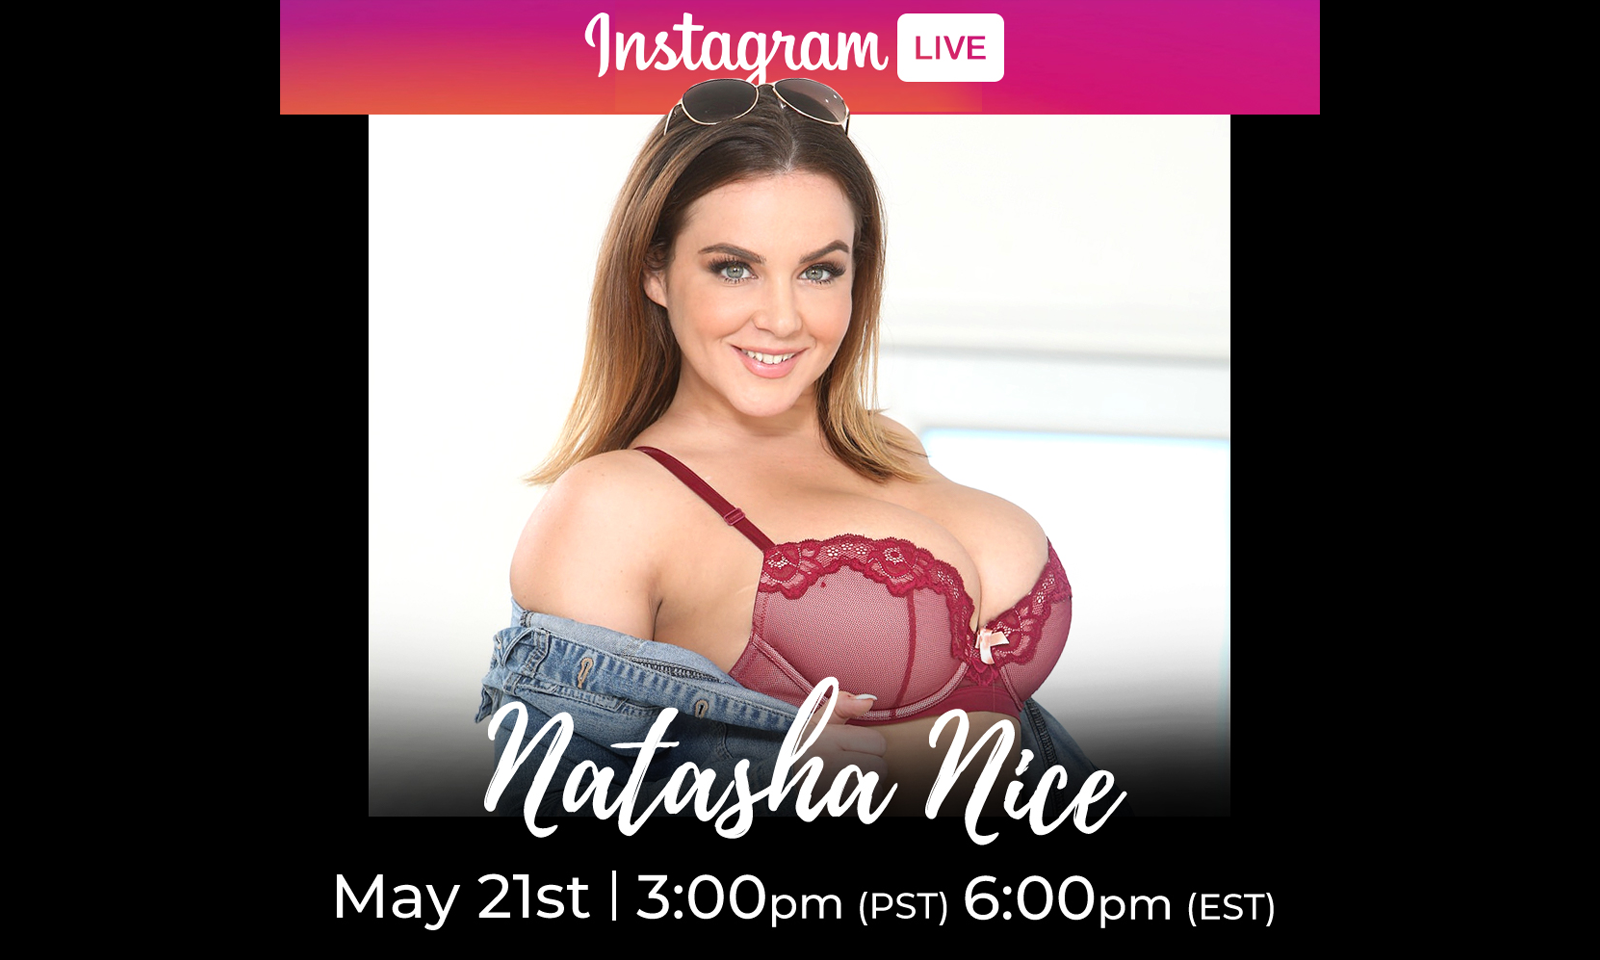 Natasha Nice to Answer Fans’ Questions in AdultTime AMA Friday